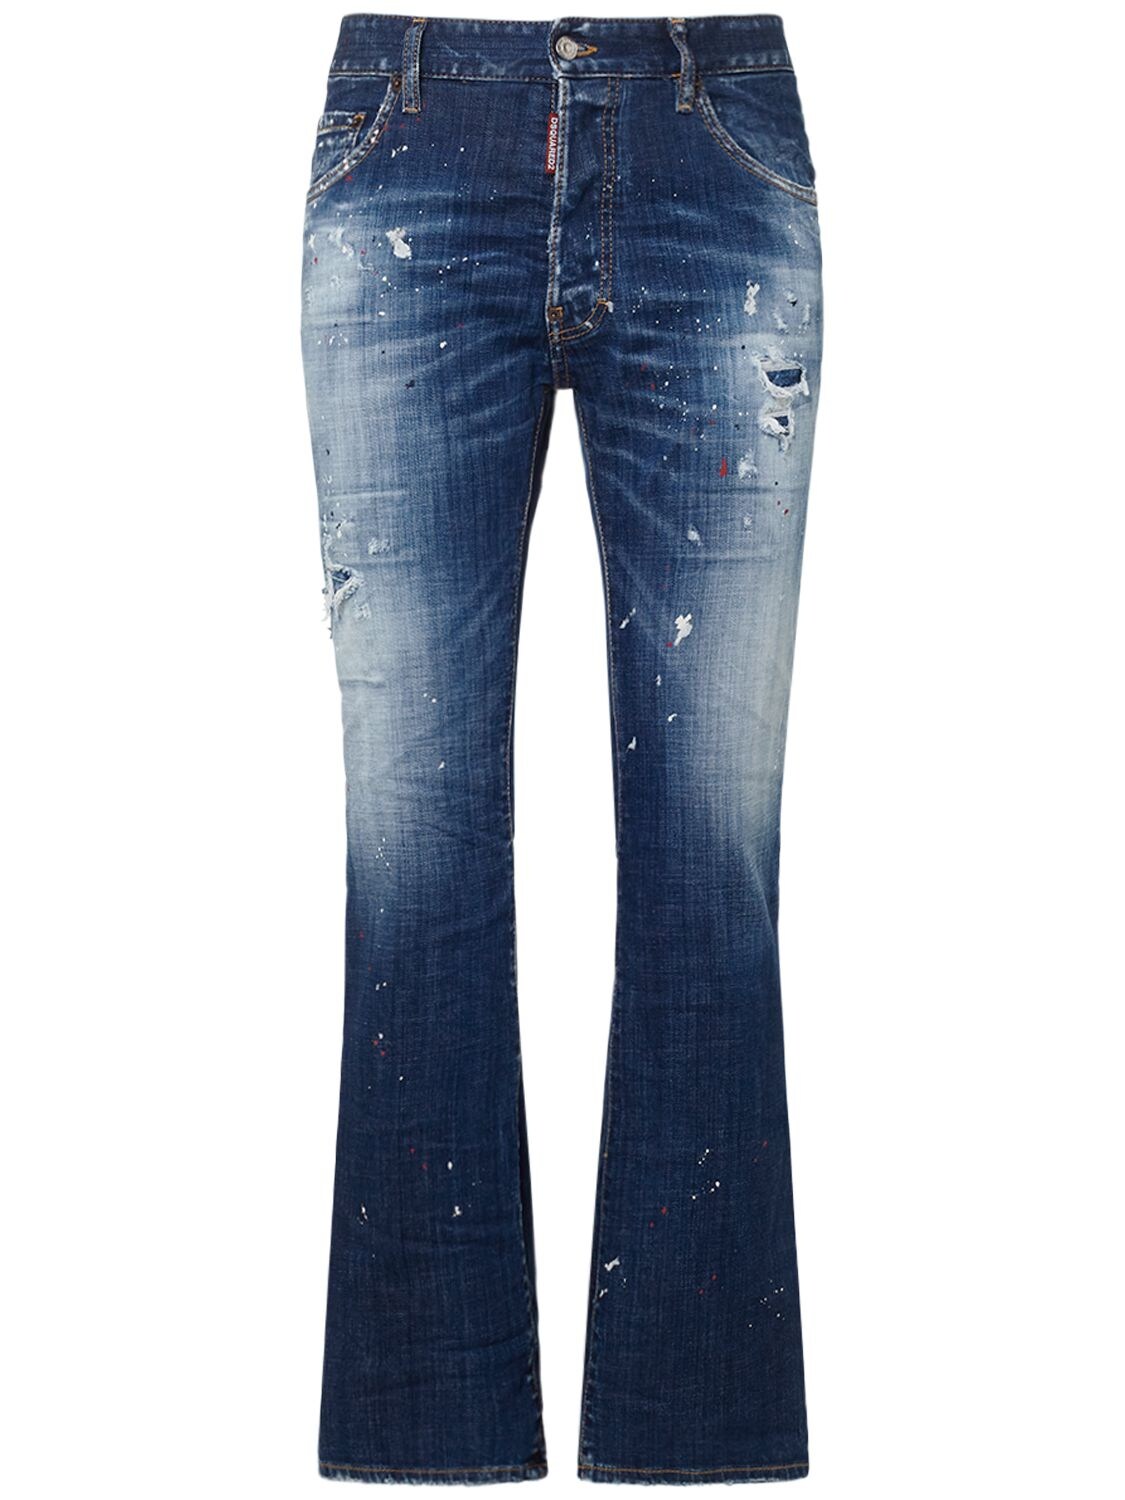 Image of Bootcut Stretch Cotton Denim Jeans